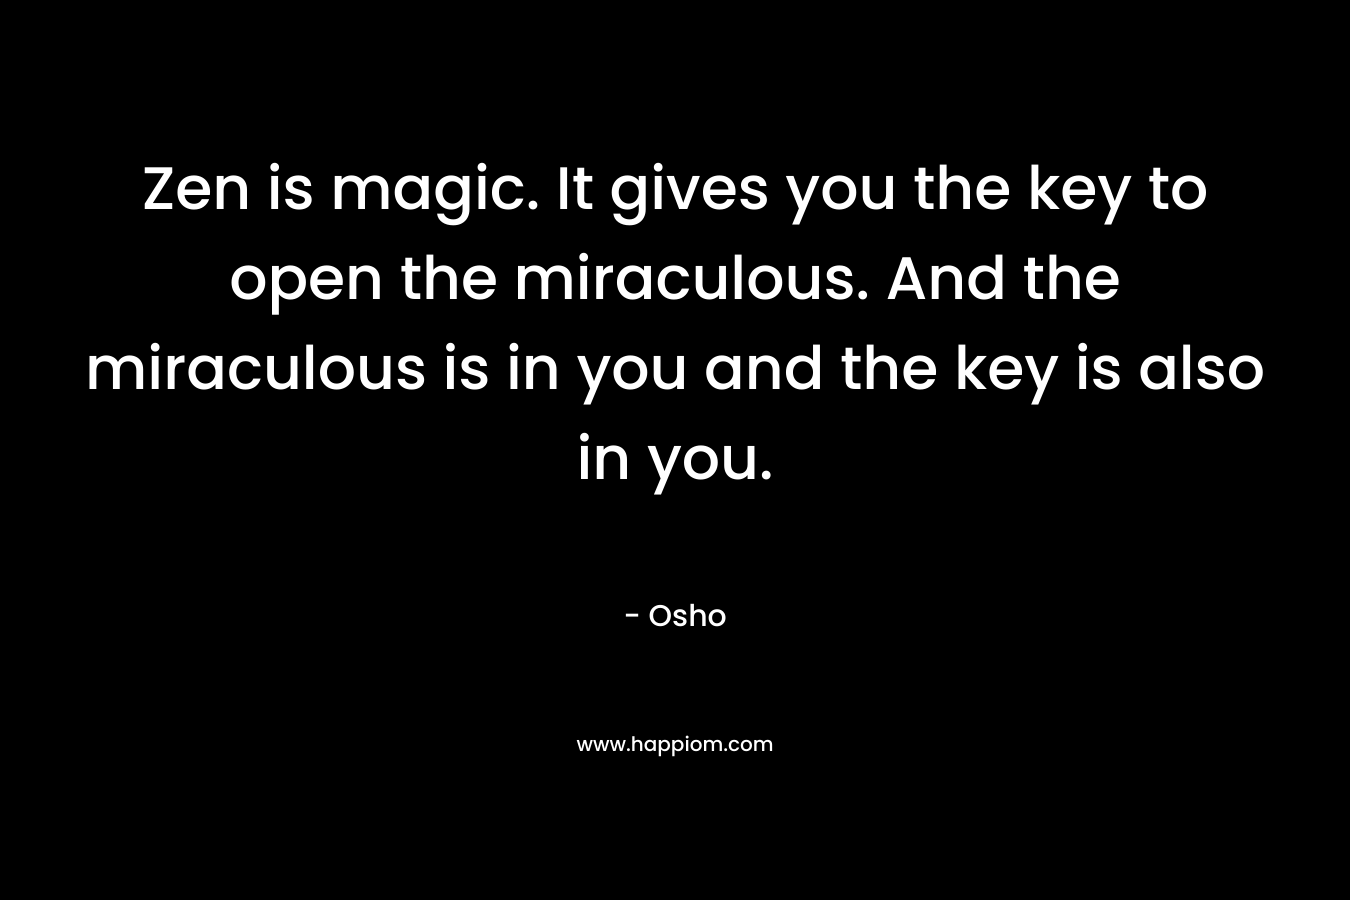 Zen is magic. It gives you the key to open the miraculous. And the miraculous is in you and the key is also in you.